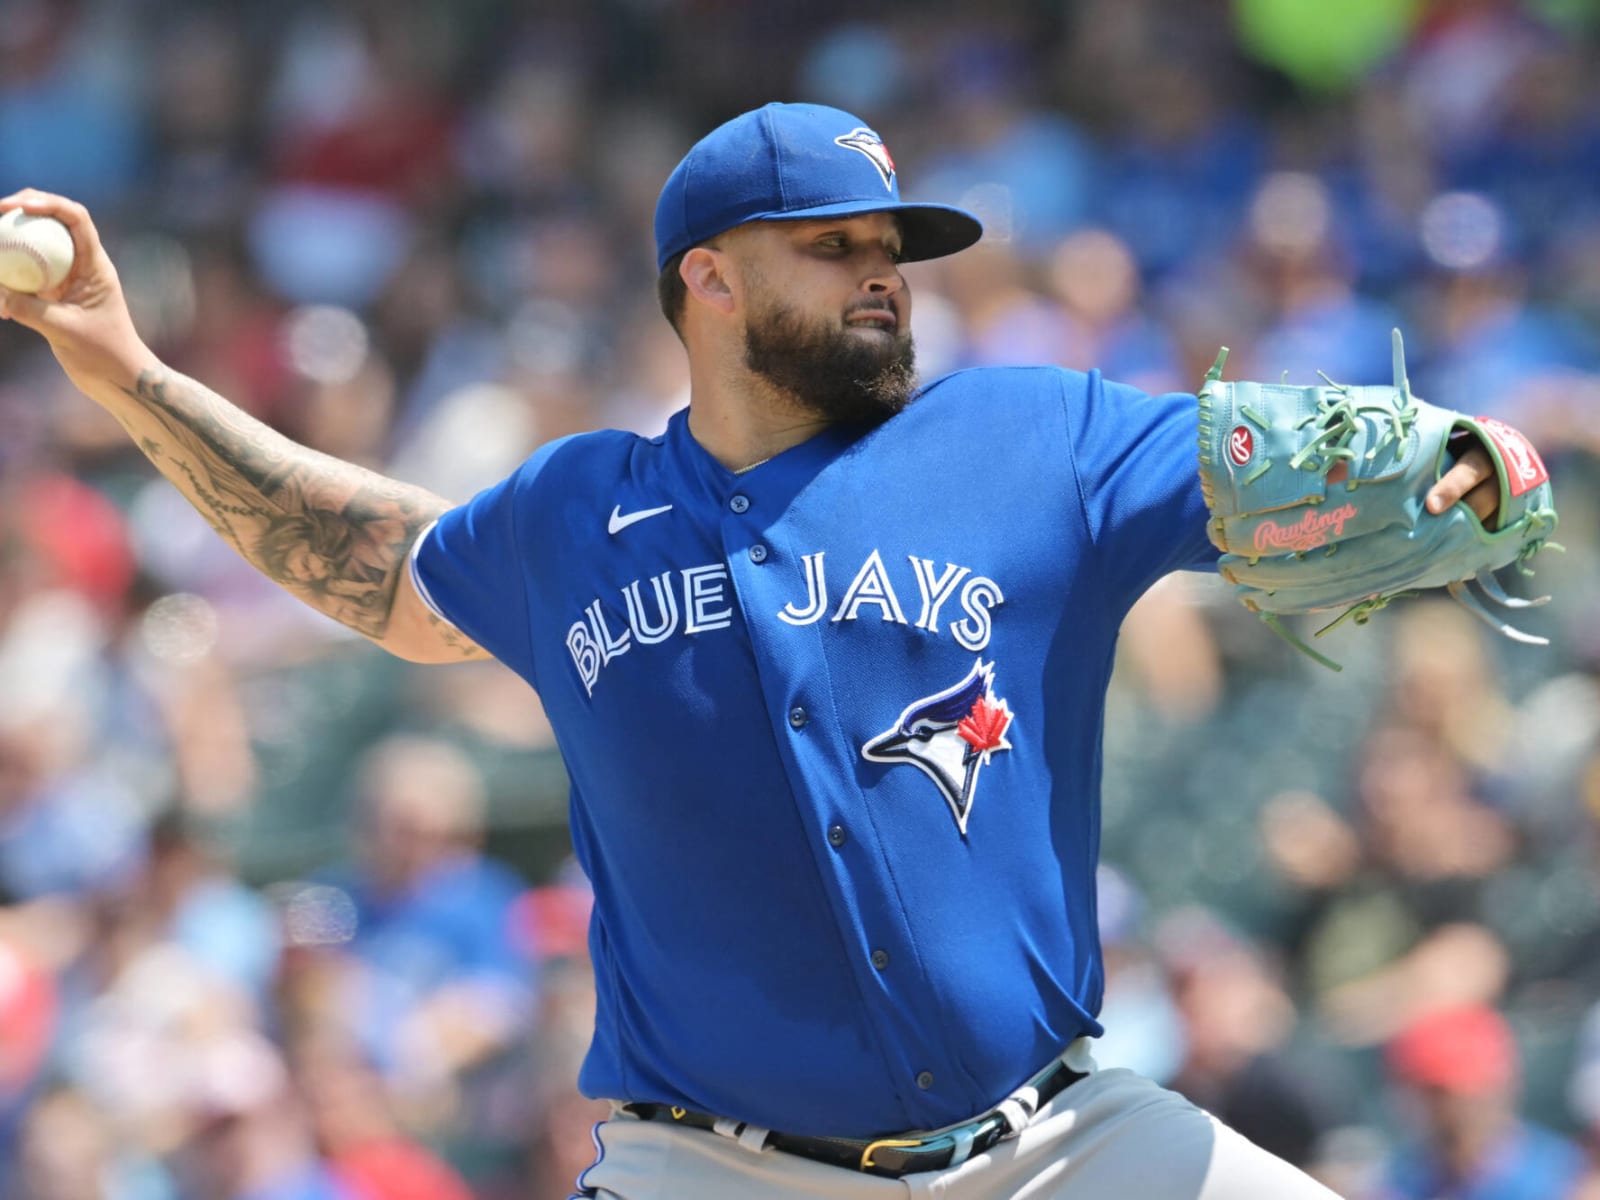 Struggling starter Alek Manoah refused to report to Triple-A after Blue Jays  sent him down: reports